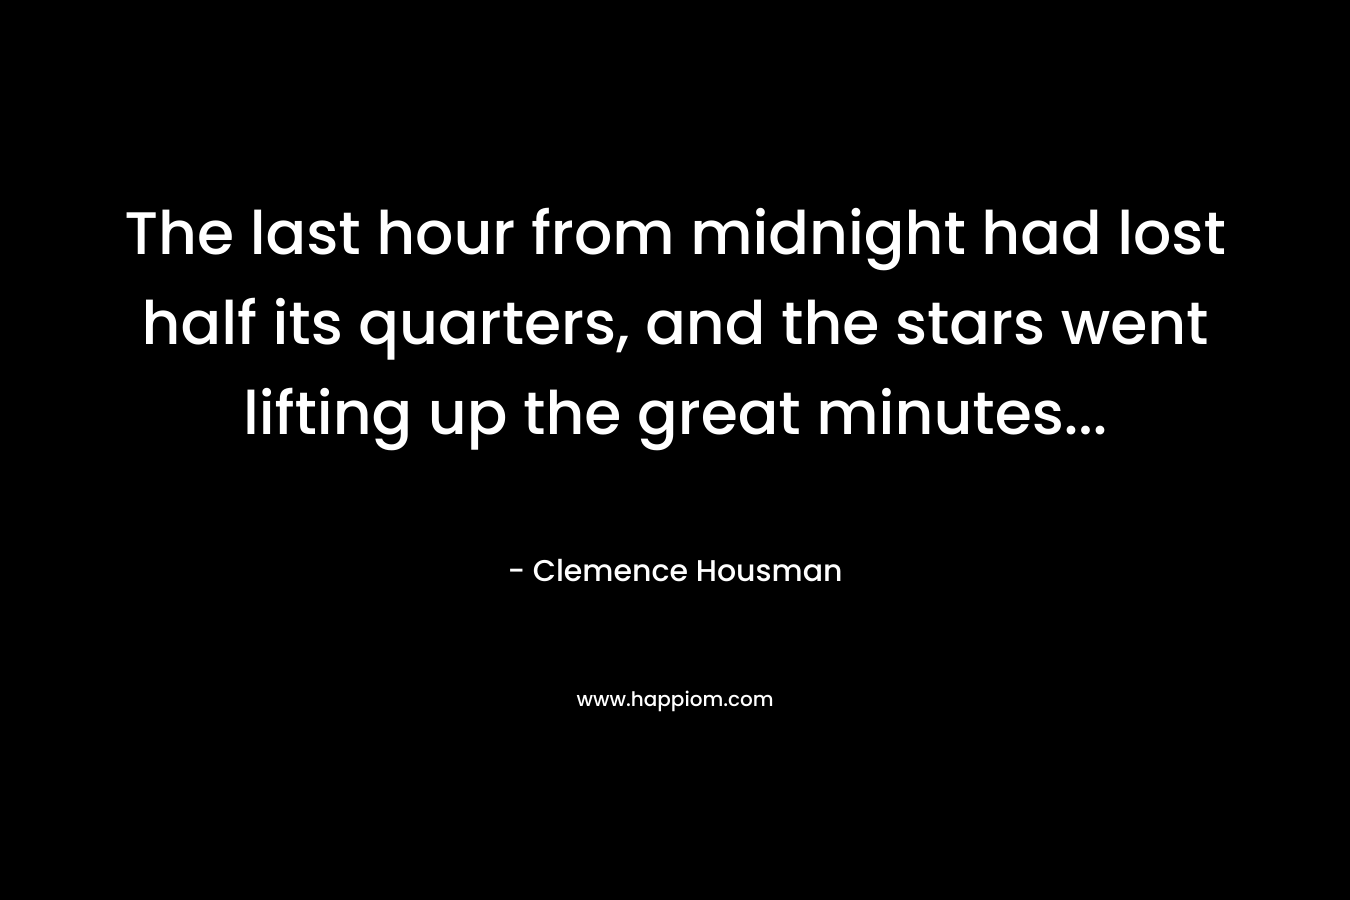 The last hour from midnight had lost half its quarters, and the stars went lifting up the great minutes… – Clemence Housman